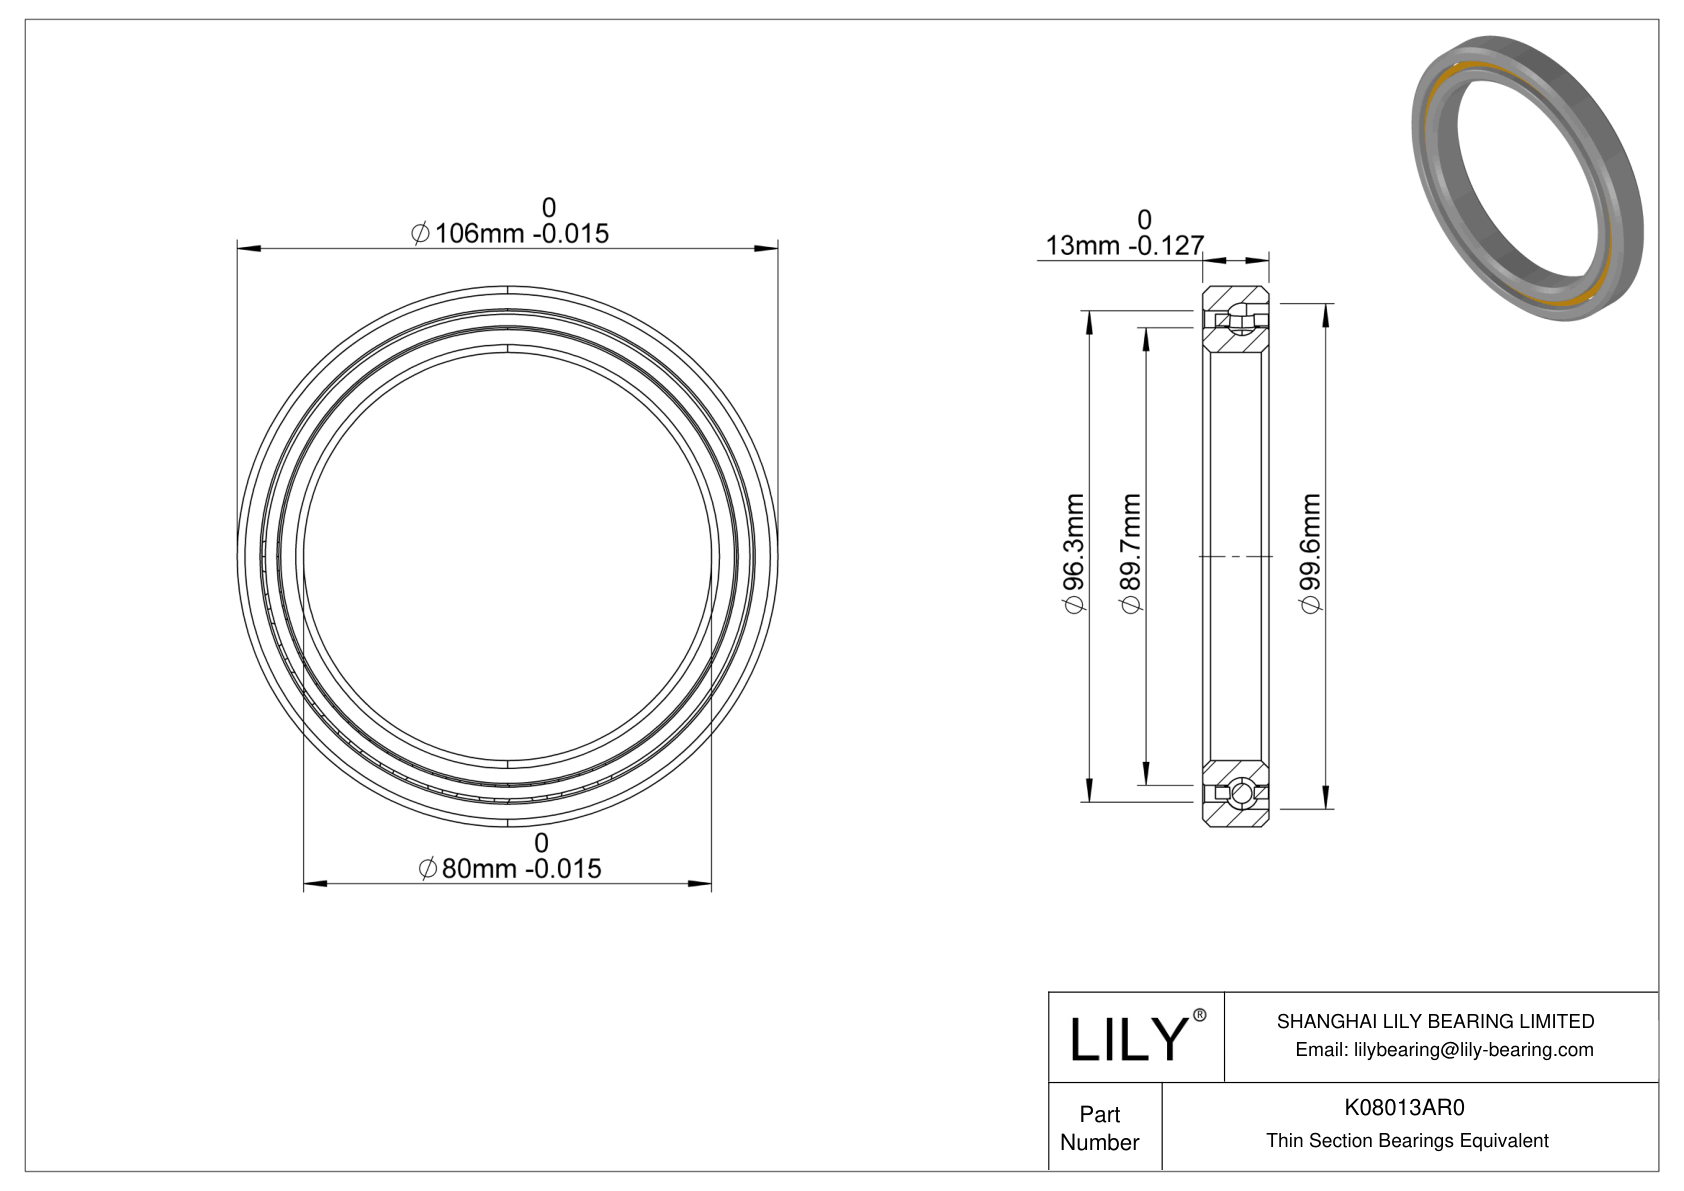 K08013AR0 Constant Section (CS) Bearings cad drawing